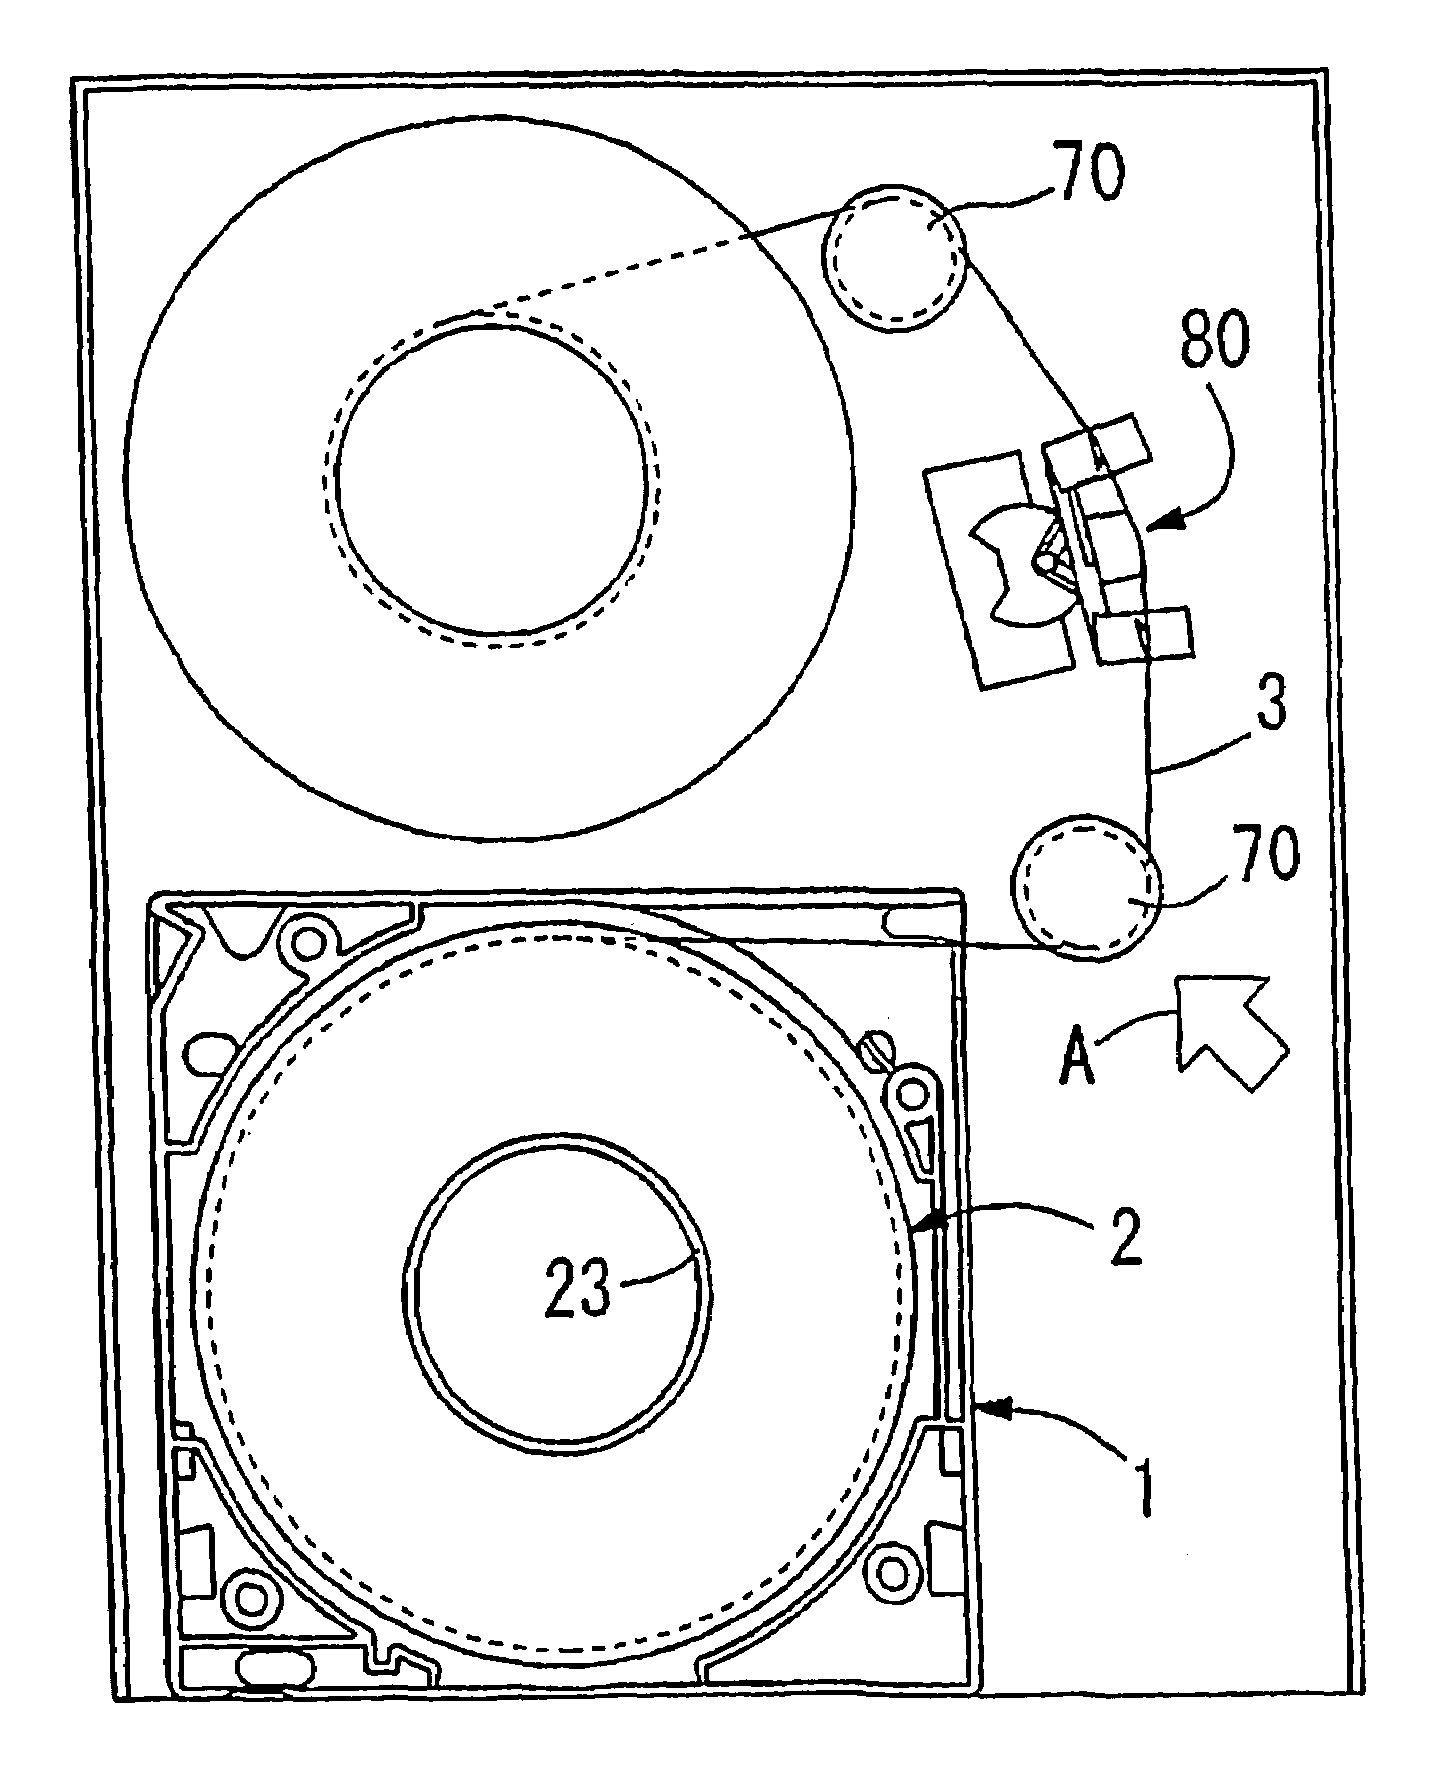 Magnetic tape and magnetic tape cartridge